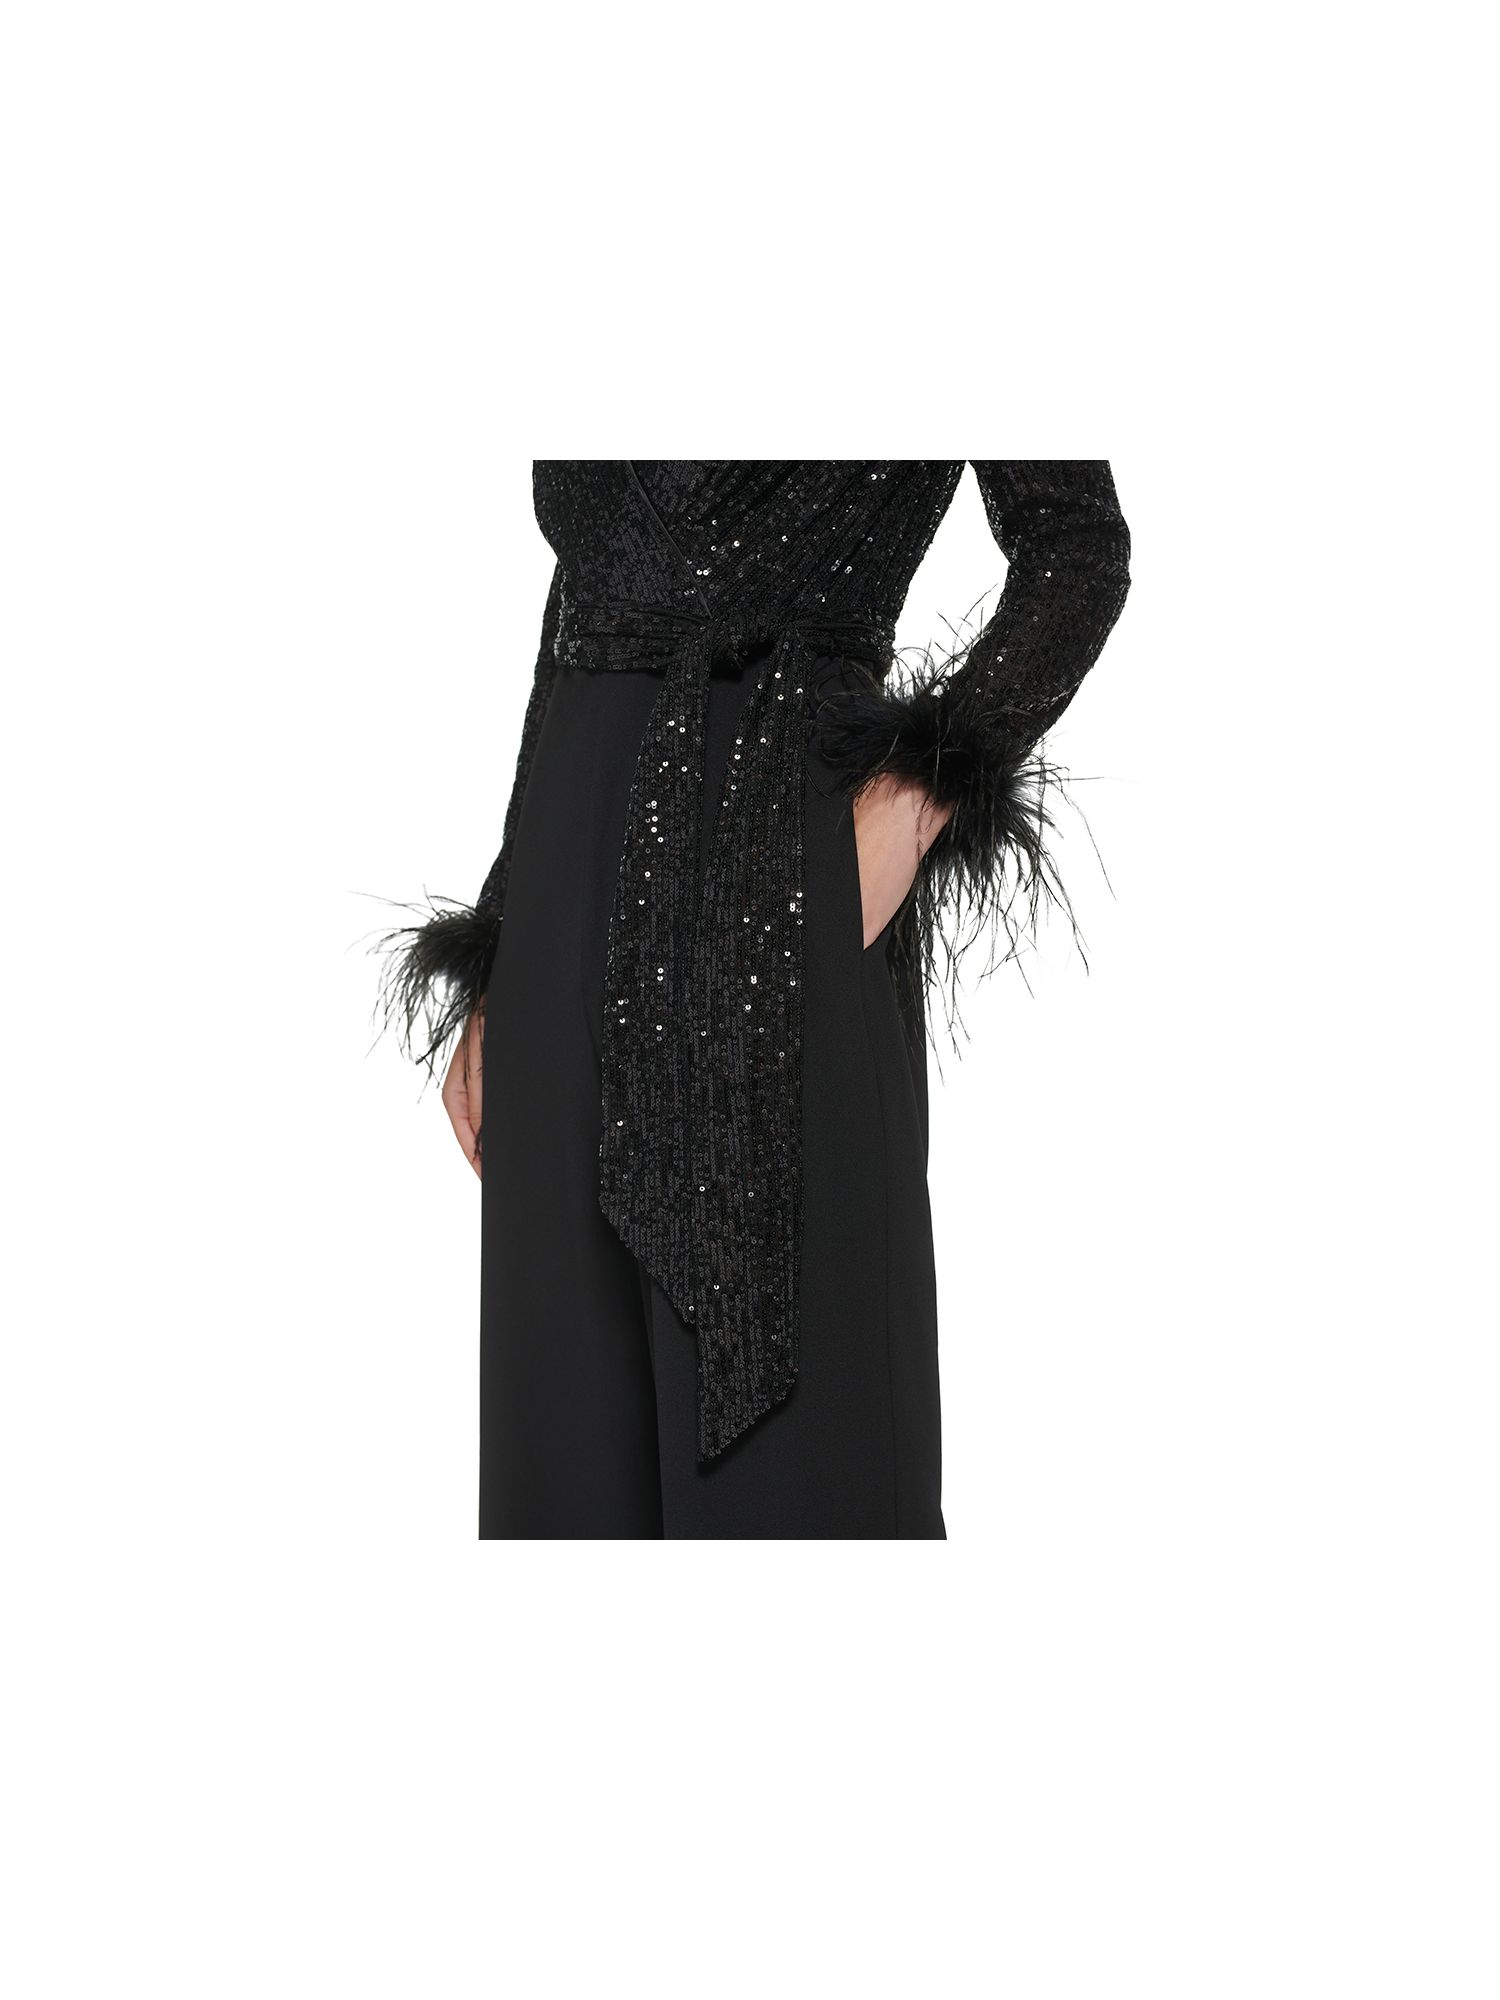 ELIZA J Womens Black Sequined Zippered Feather Cuffs Tie-Belt Long Sleeve V Neck Cocktail Straight leg Jumpsuit 4